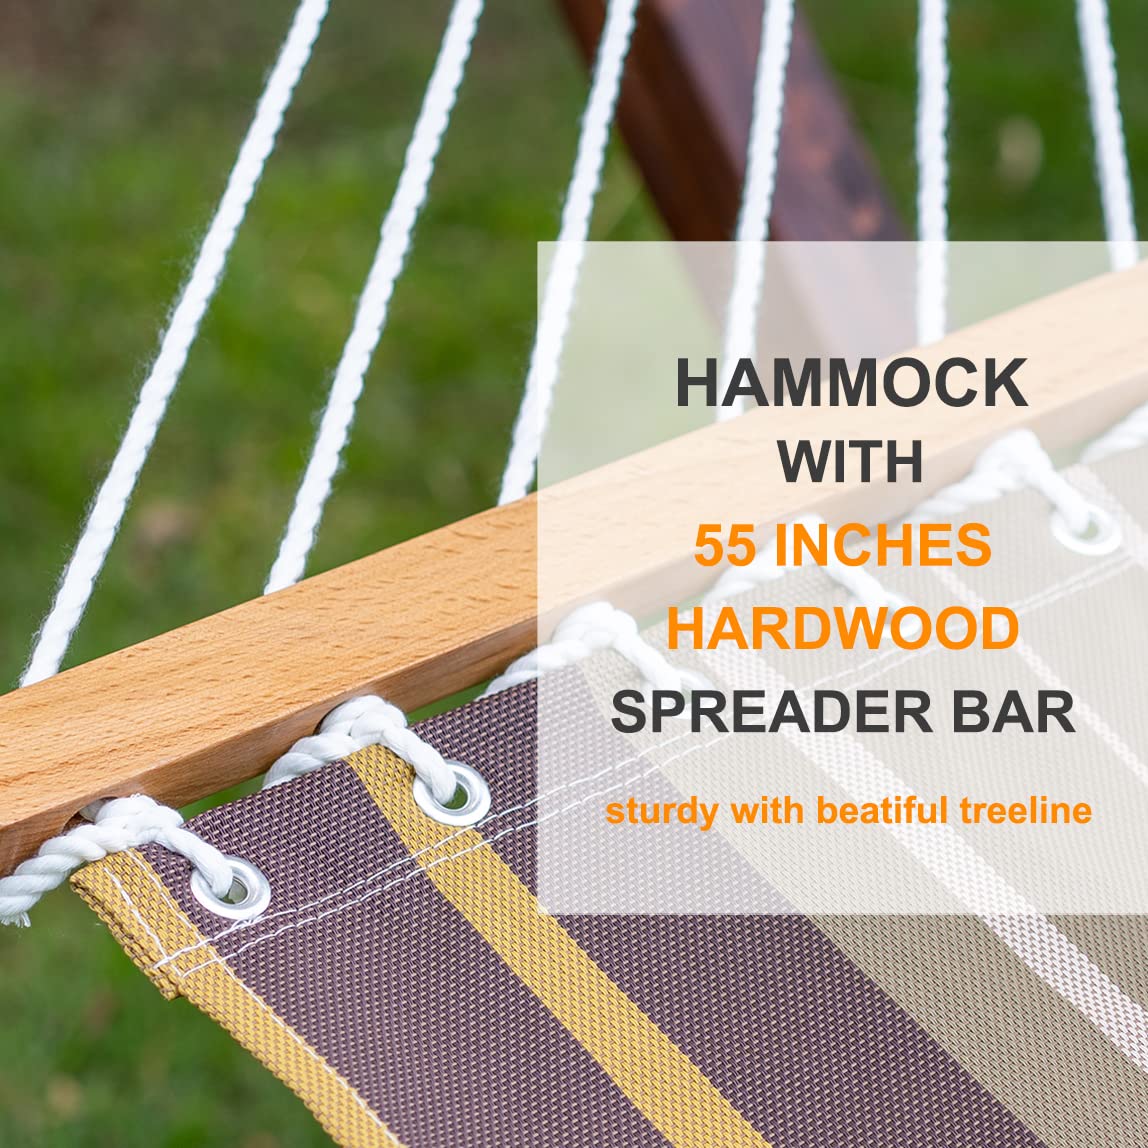 Lazy Daze Hammocks Quick Dry Hammock with Spreader Bar 2 Person Double Hammock with Chains Outdoor Outside Patio Poolside Backyard Beach 450 lbs Capacity Coffee